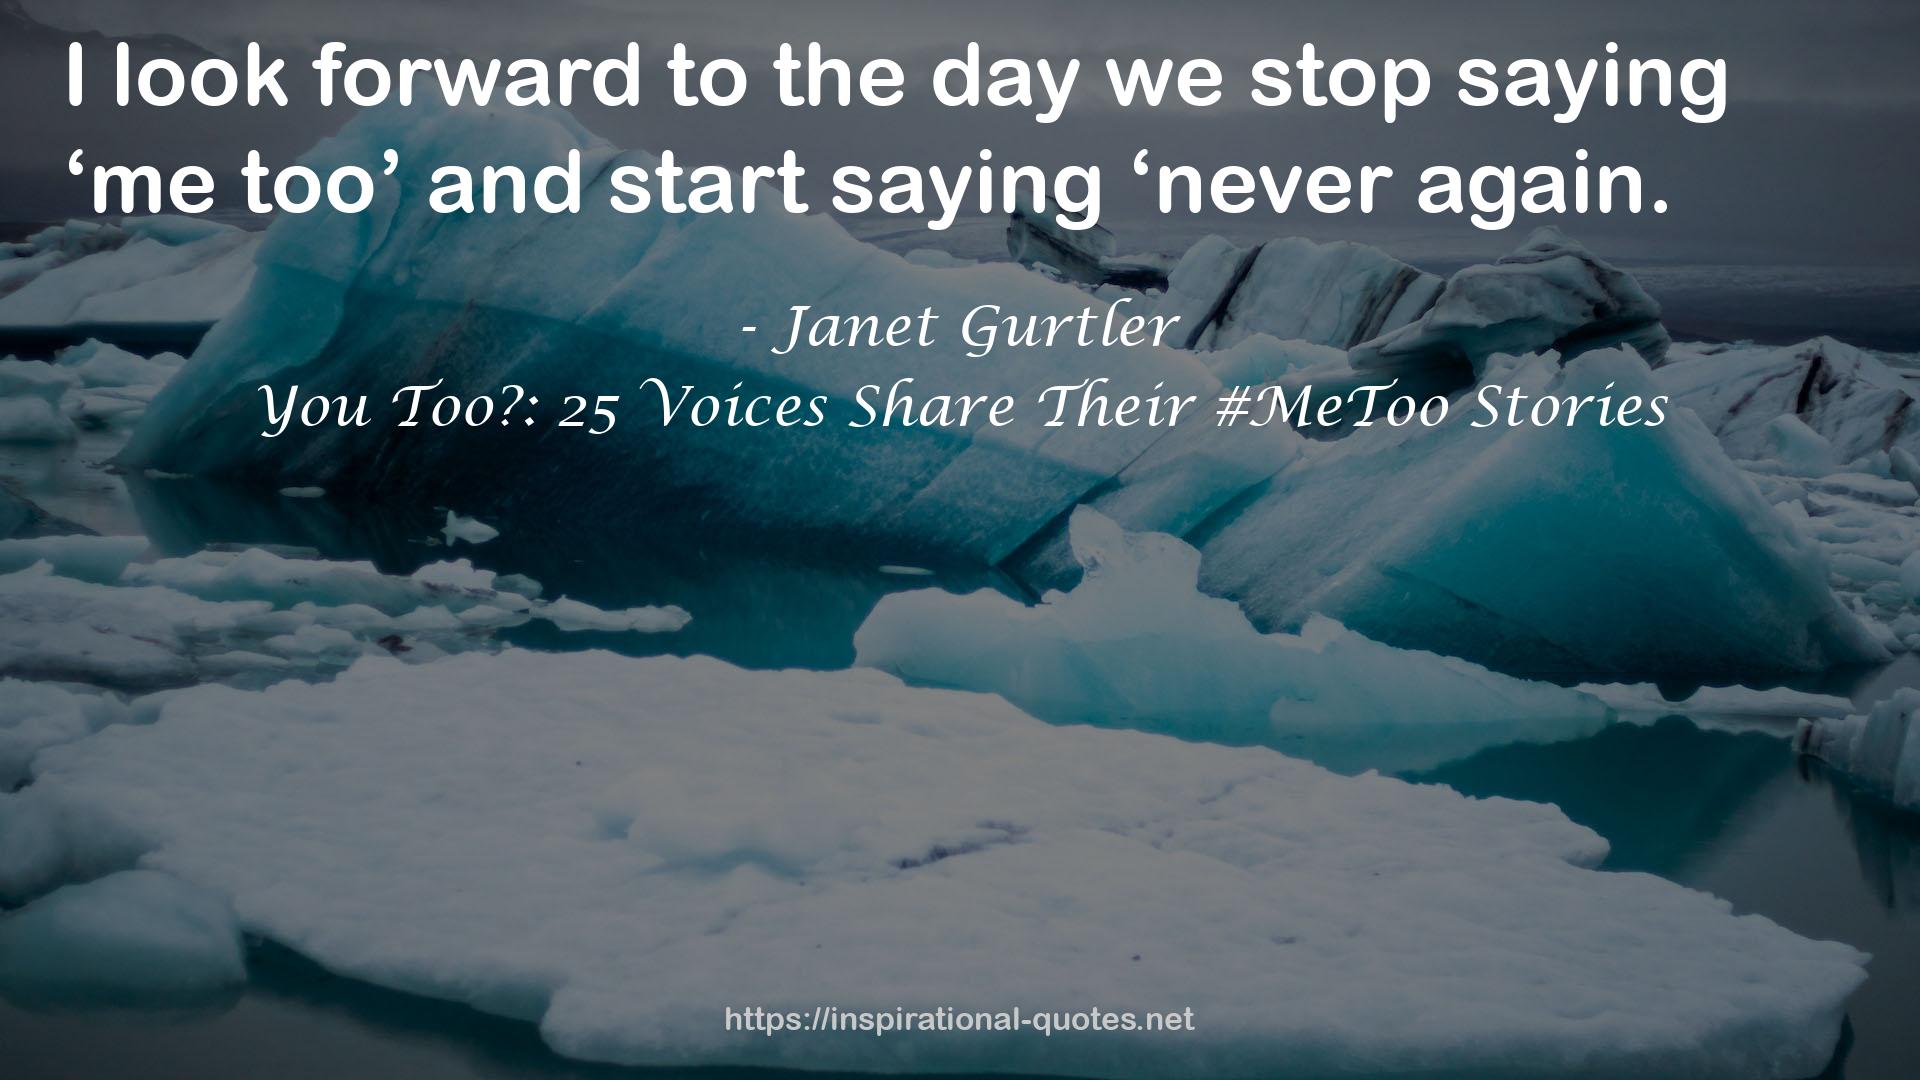 You Too?: 25 Voices Share Their #MeToo Stories QUOTES